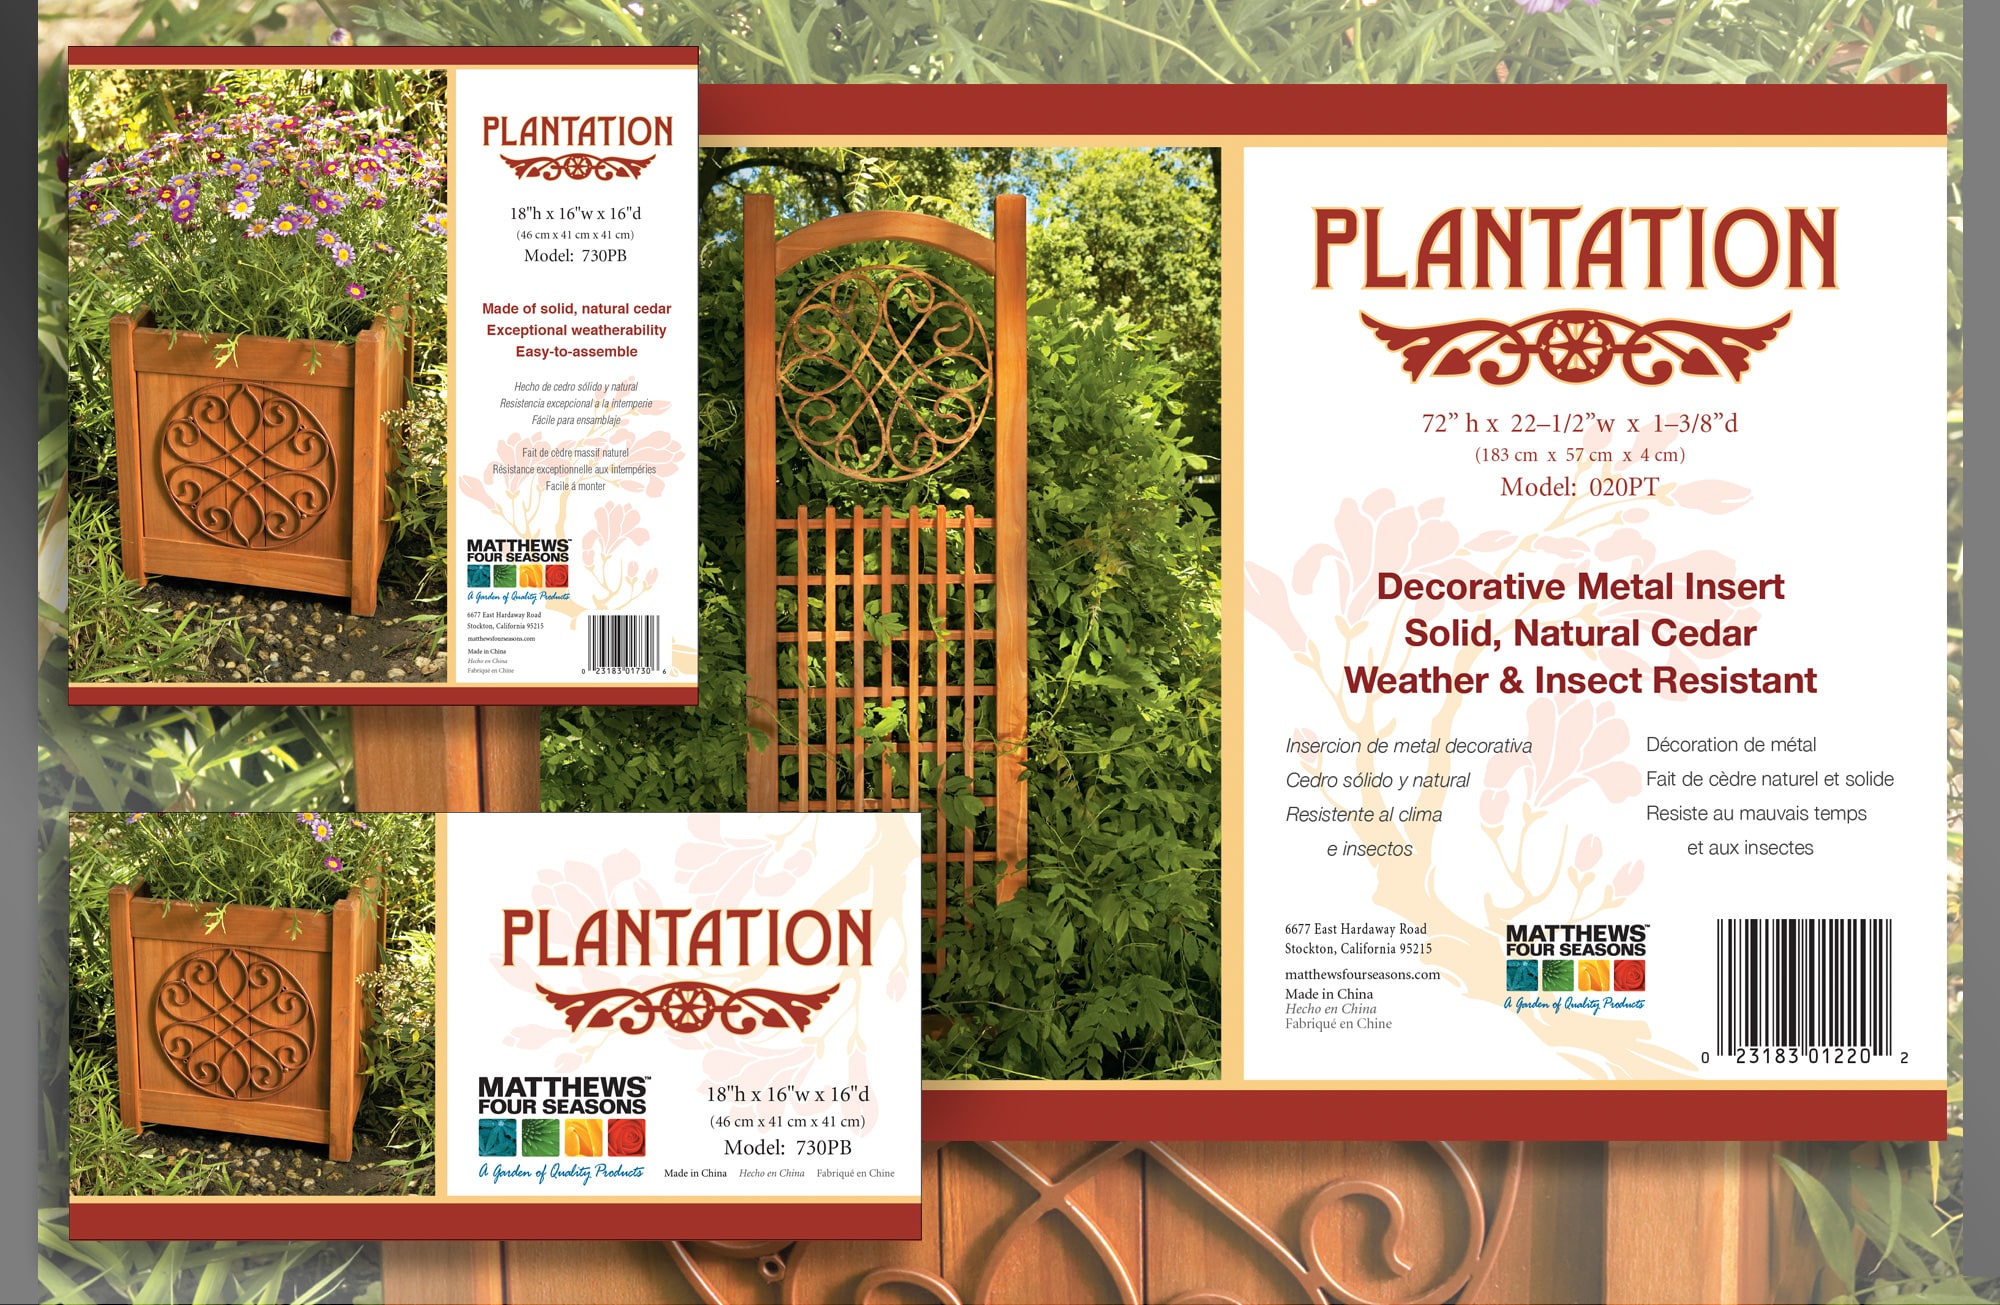  USA, Plantation Brand, Collections Box and Trellis Label Packaging 